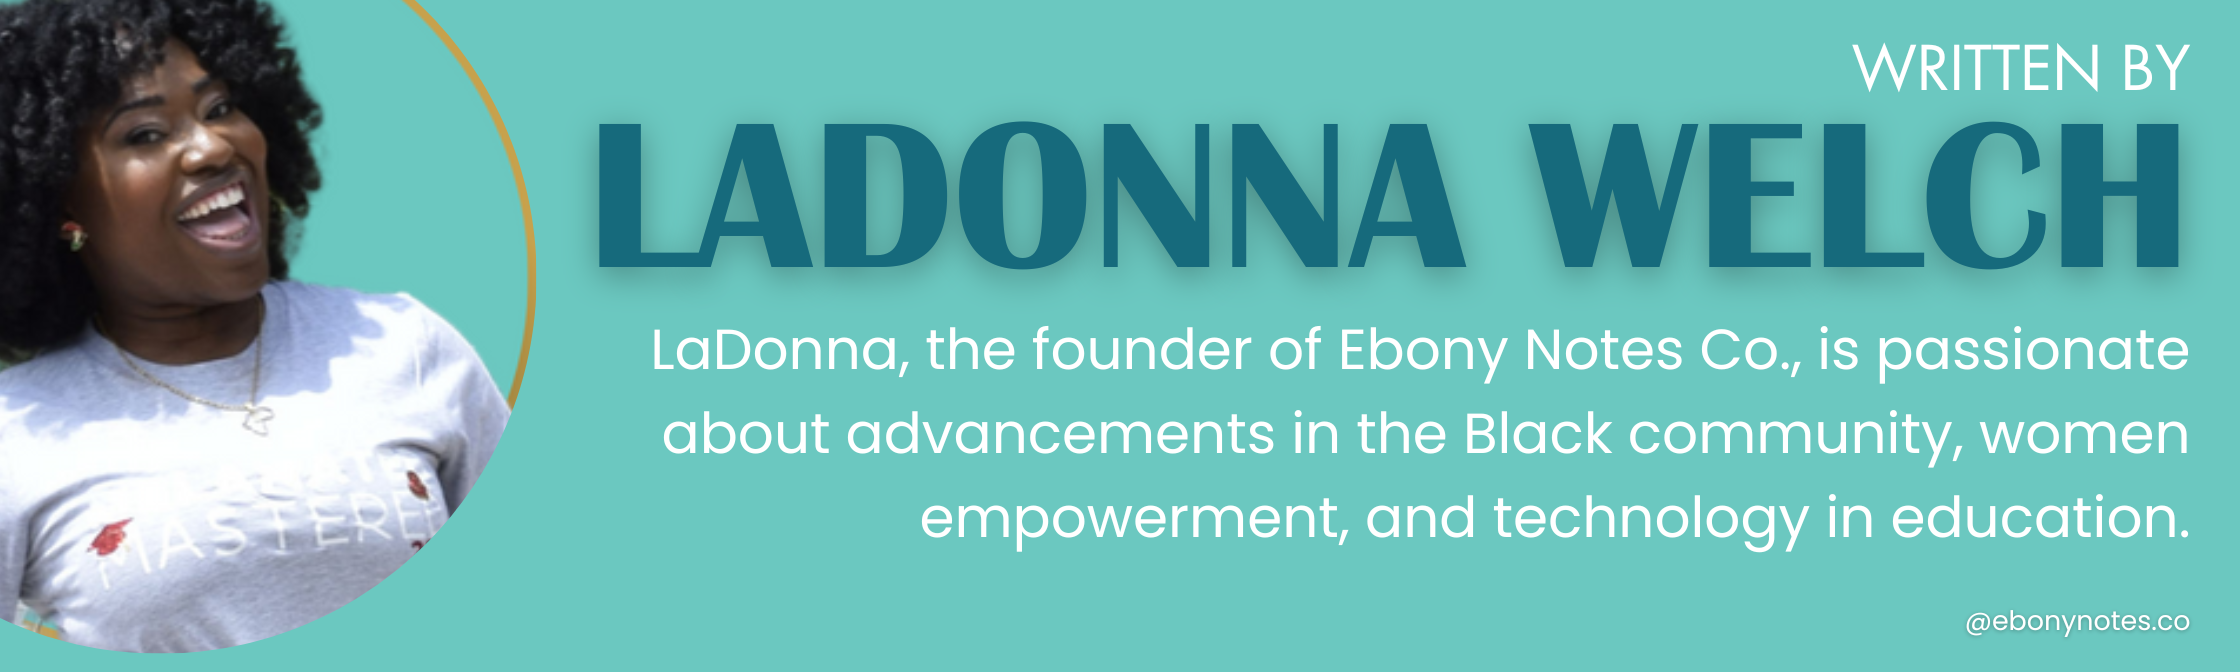 LaDonna Welch, Ebony Notes Co. CEO/Founder Blog Post